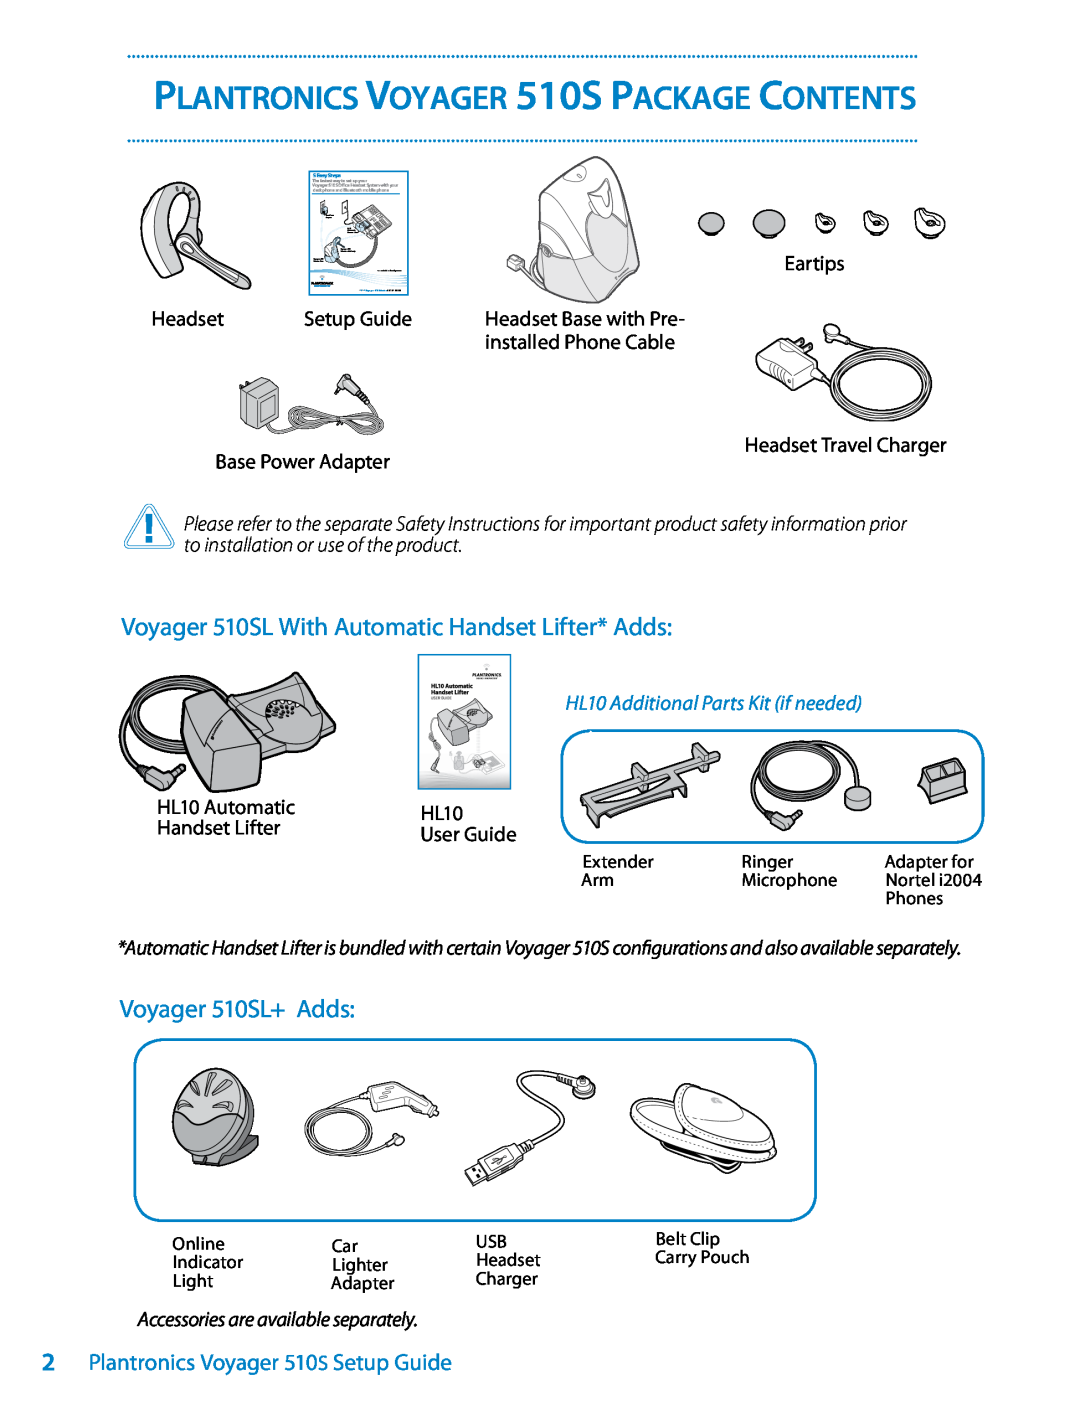 Plantronics setup guide Plantronics Voyager 510S Package Contents, Voyager 510SL With Automatic Handset Lifter* Adds 